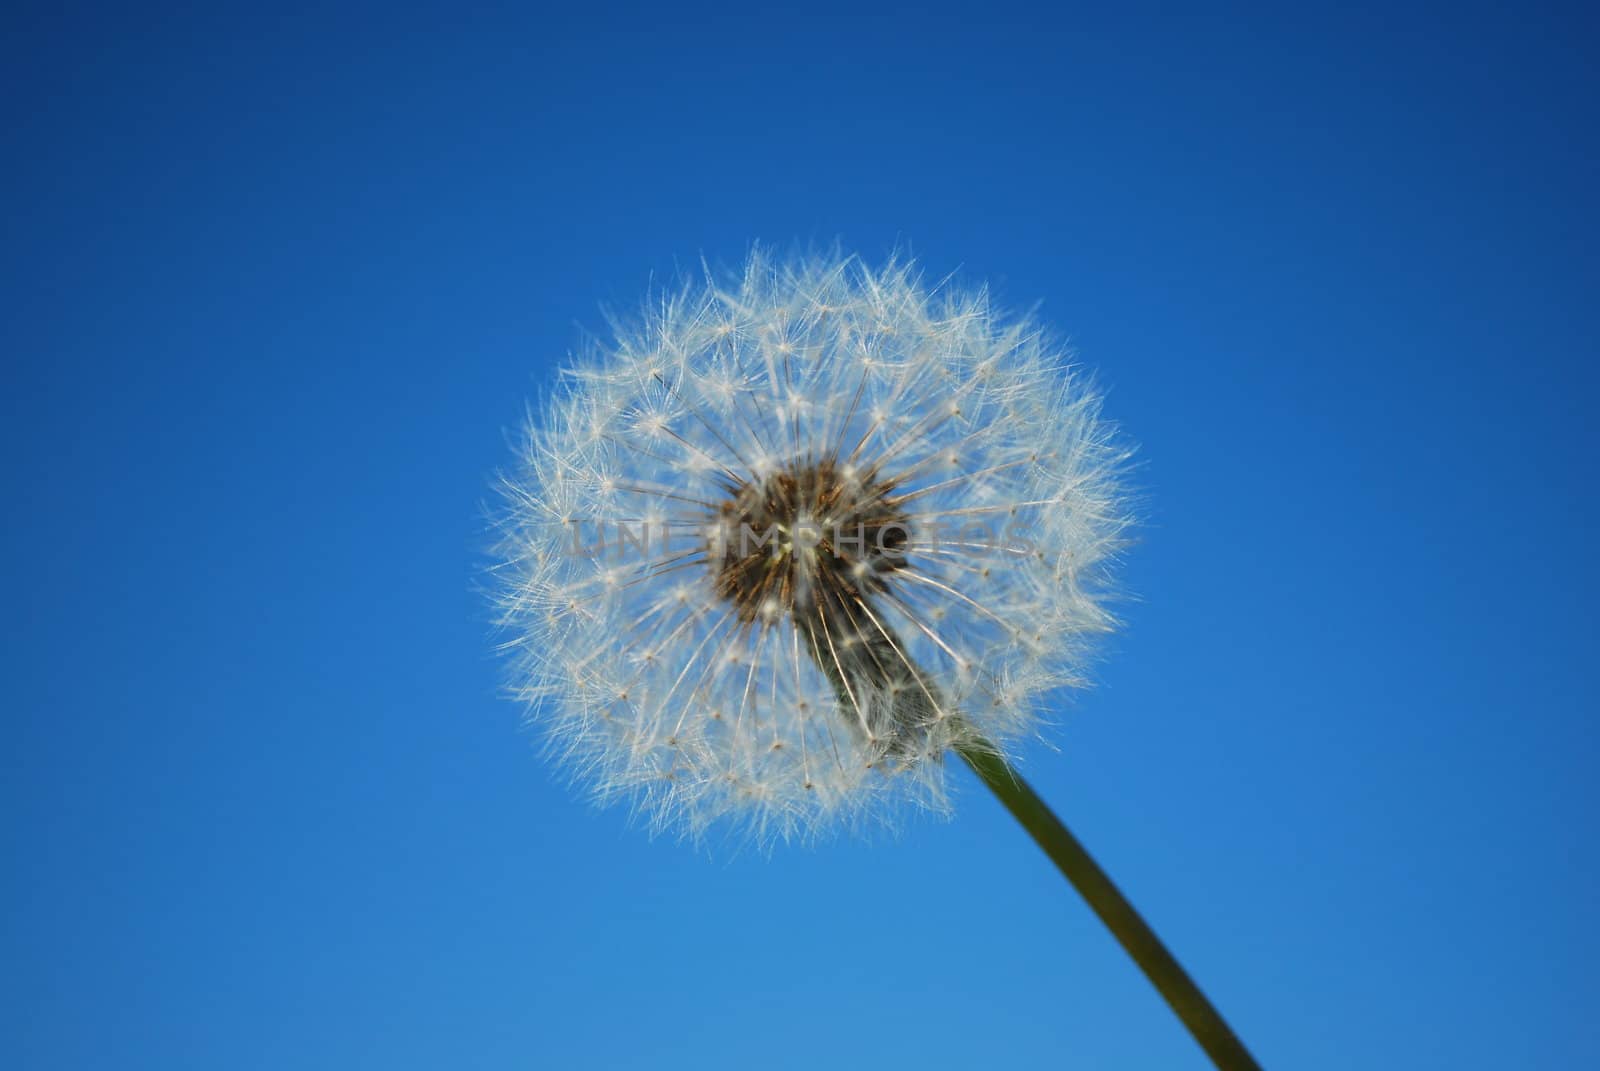 Dandelion with Blue Sky Background by luissantos84